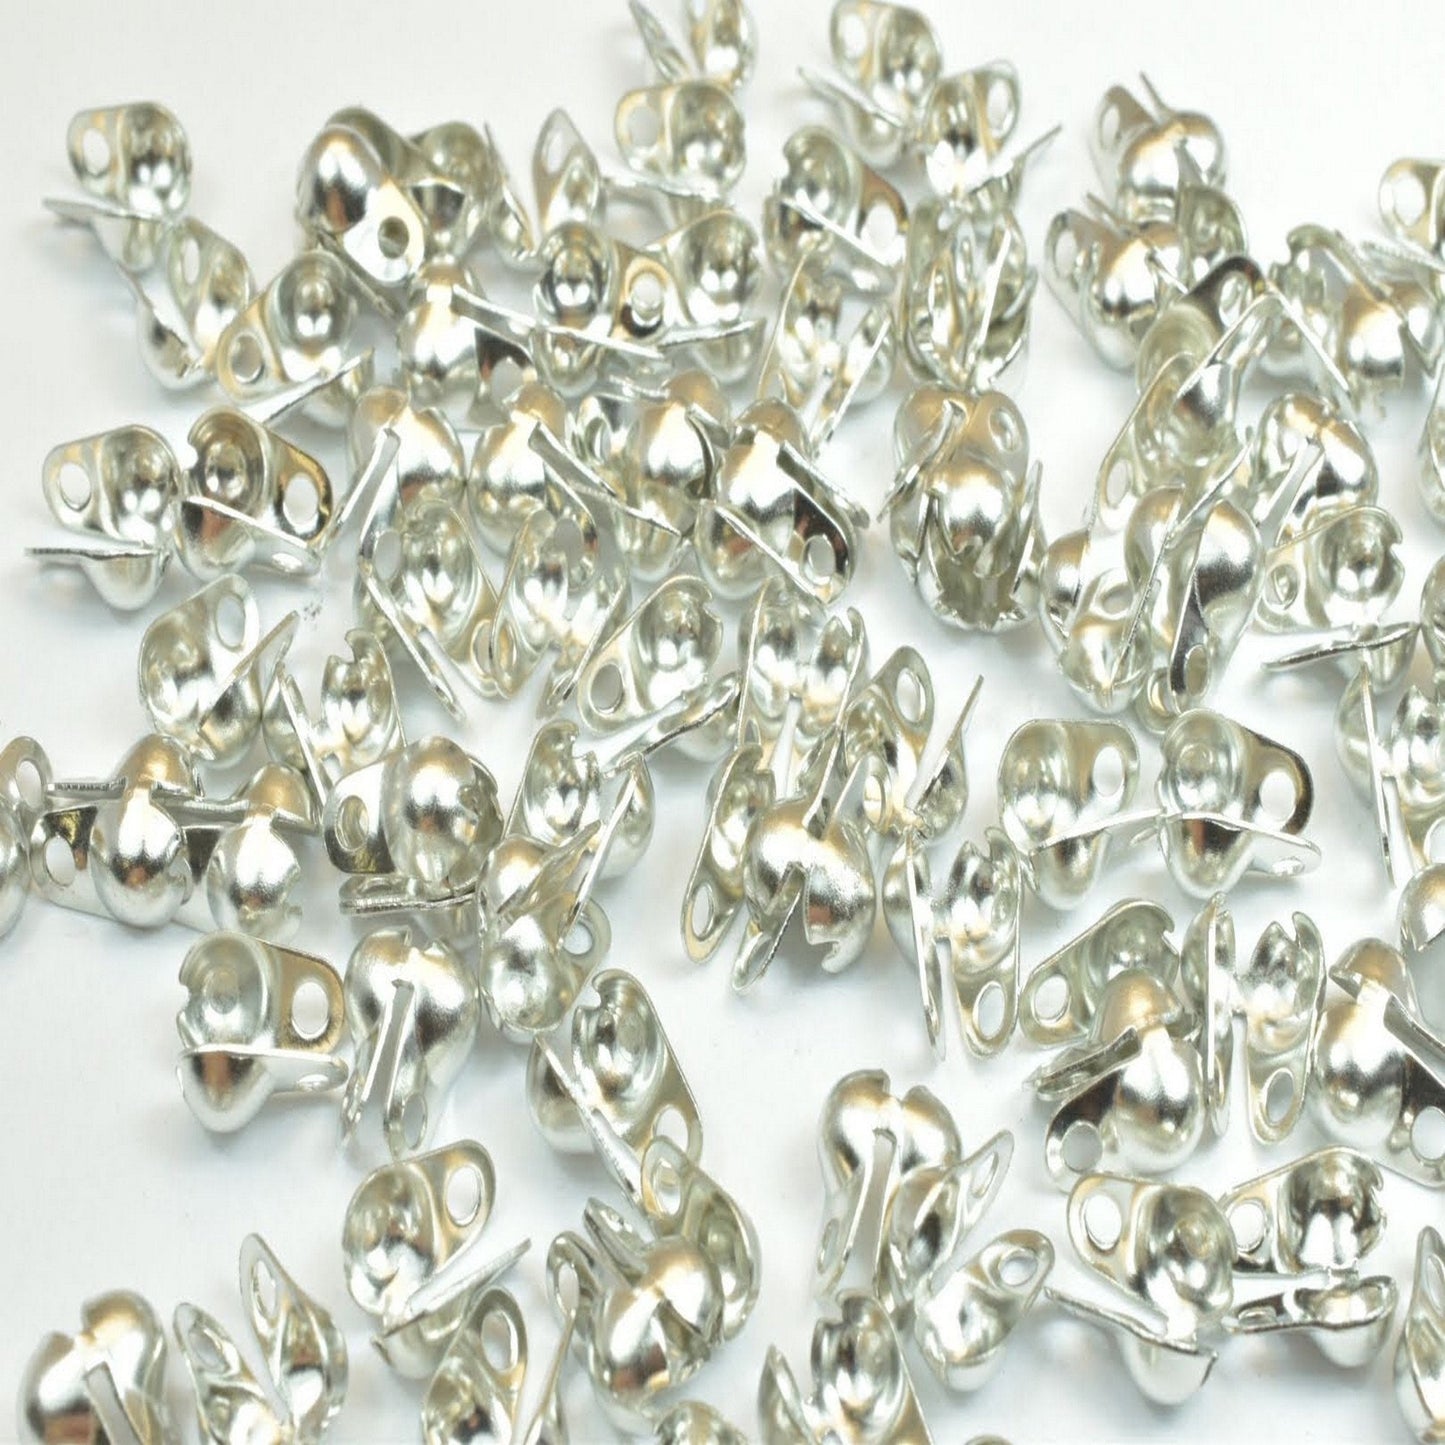 Ball chain crimp cover end tip beads size 1.5mm, 2.4mm, 3.2mm, 4mm for jewelry making findings silver and gold tone